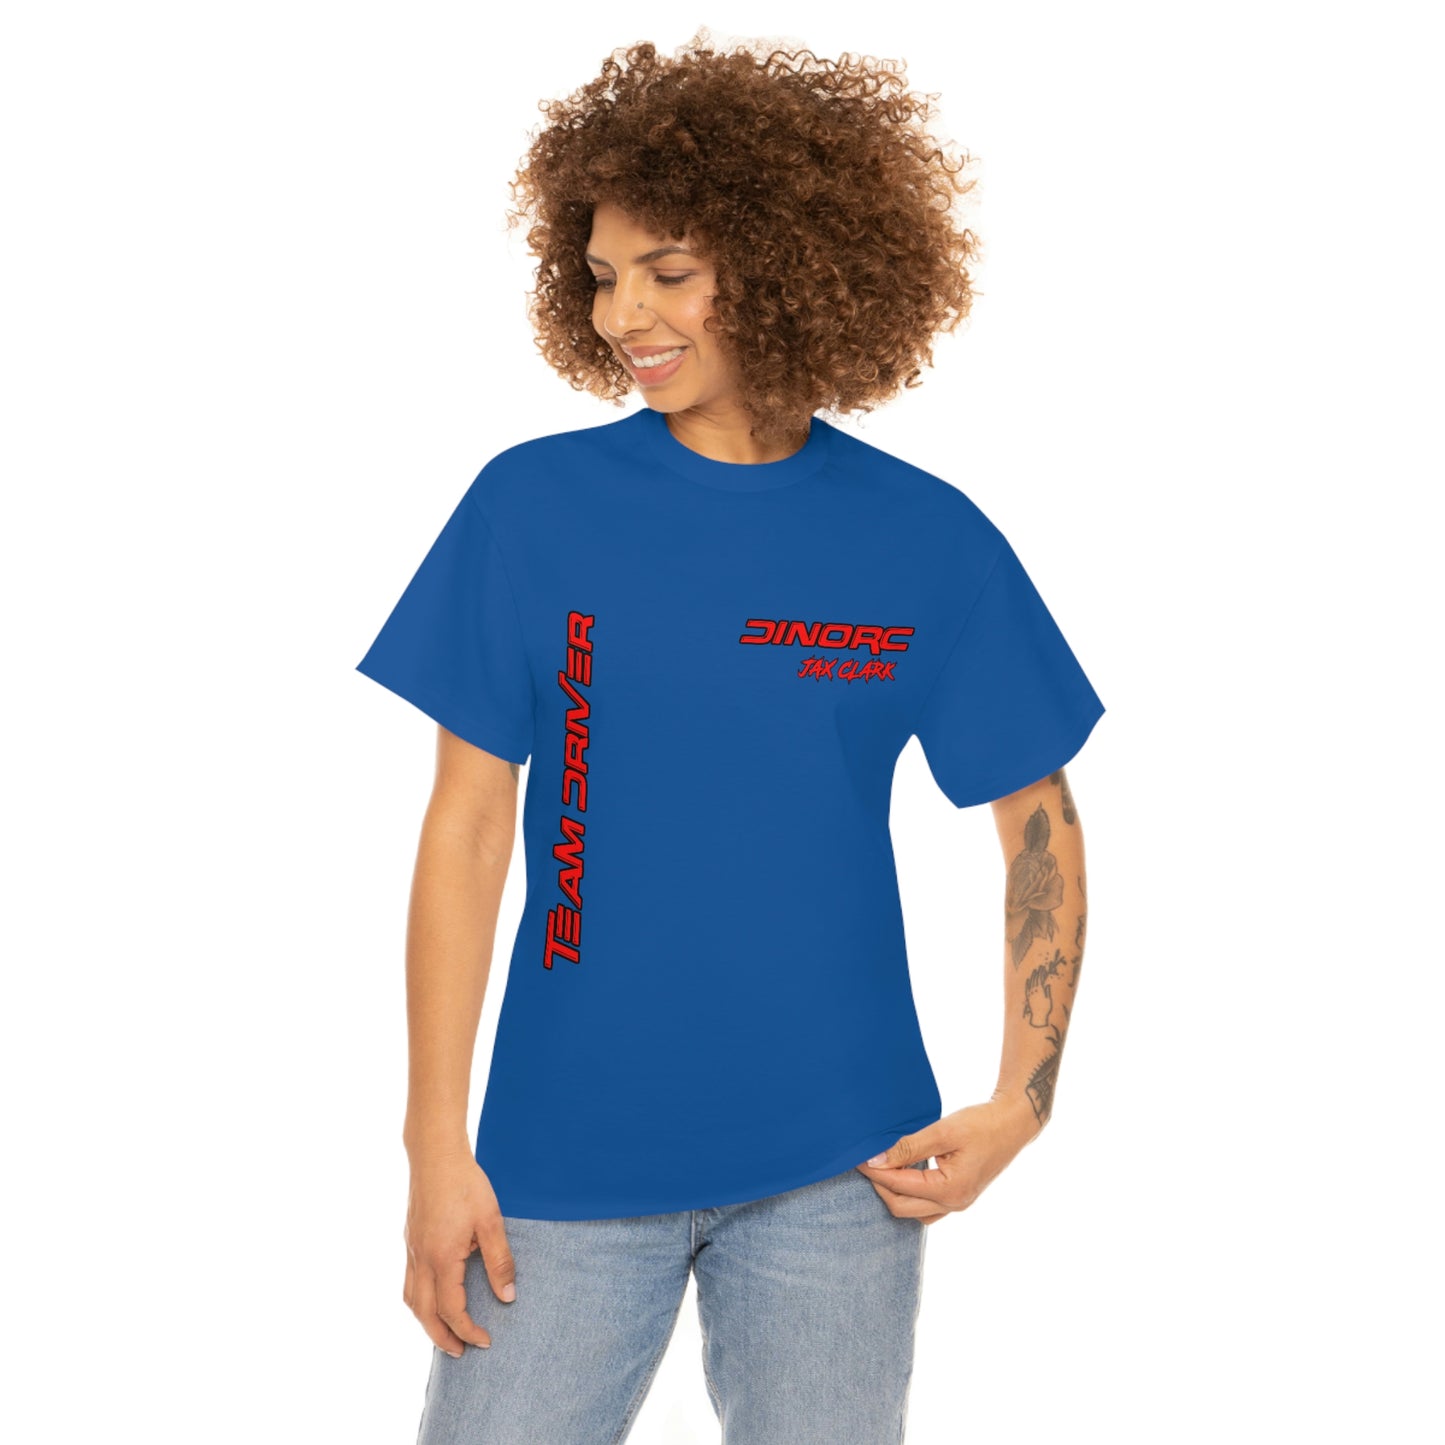 Team Driver Jax Clark Front and Back DinoRc Logo T-Shirt S-5x 5 colors